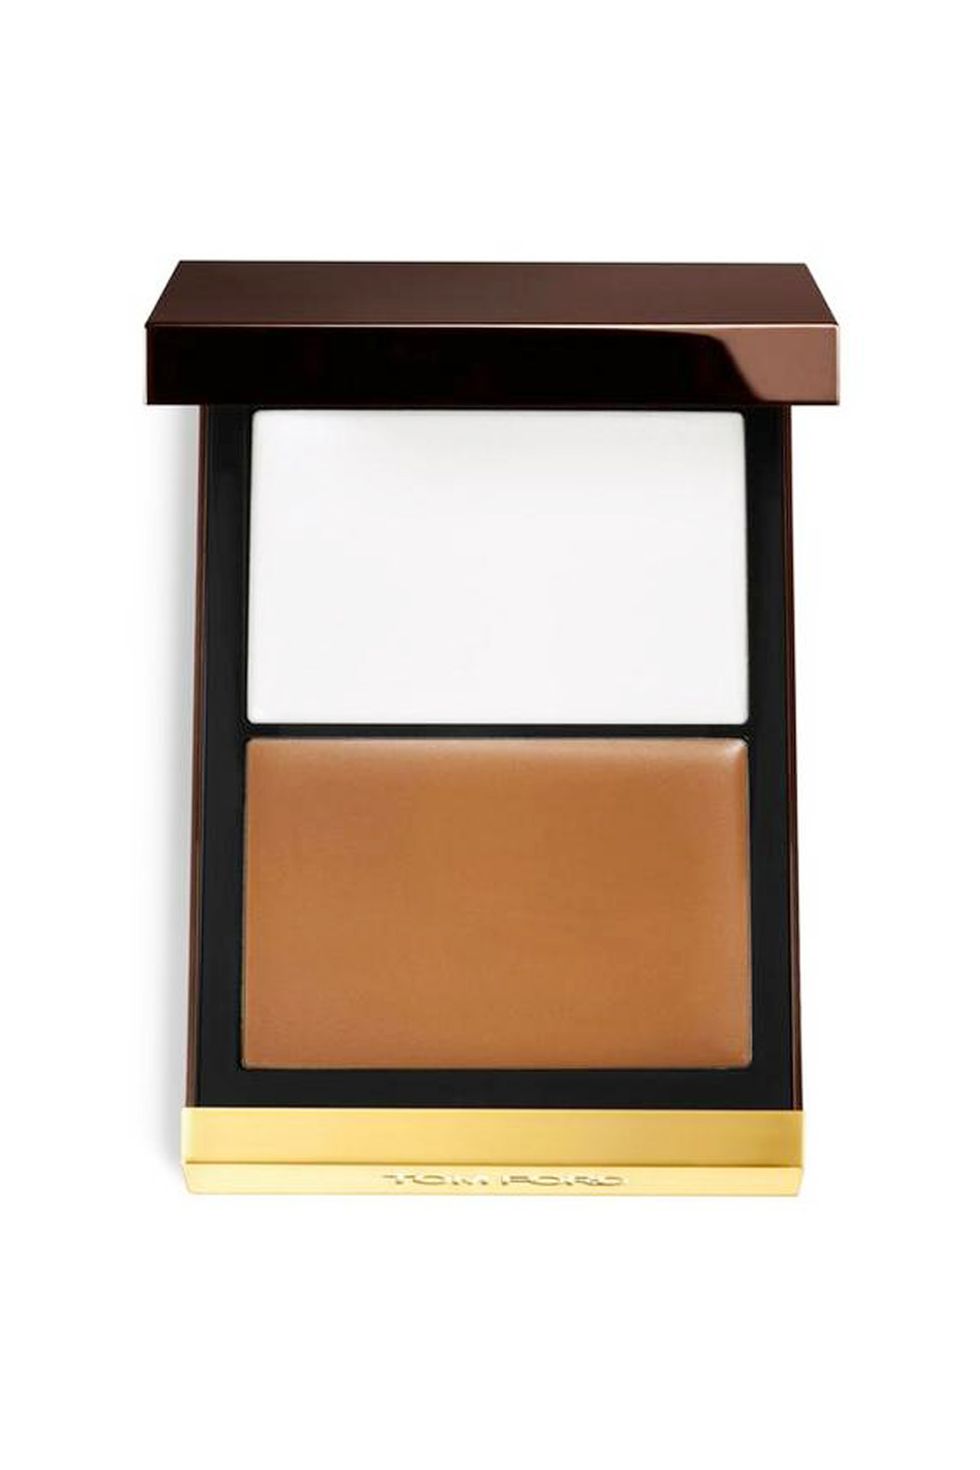 <p>For the best au natural contour, makeup artist Alana Wright loves Tom Ford Sculpt and Illuminate Palette. "It has the perfect sheer shade of taupe it mimics a real shadow. It's really convenient to work with on top of foundation/concealer and because of it's gel like texture it's provides a beautiful natural skin finish."</p><p>Tom Ford Sculpt and Illuminate Palette, $80, <u data-redactor-tag="u"><a href="http://www.tomford.com/shade-and-illuminate/T0PL.html">Tomford.com</a></u></p>